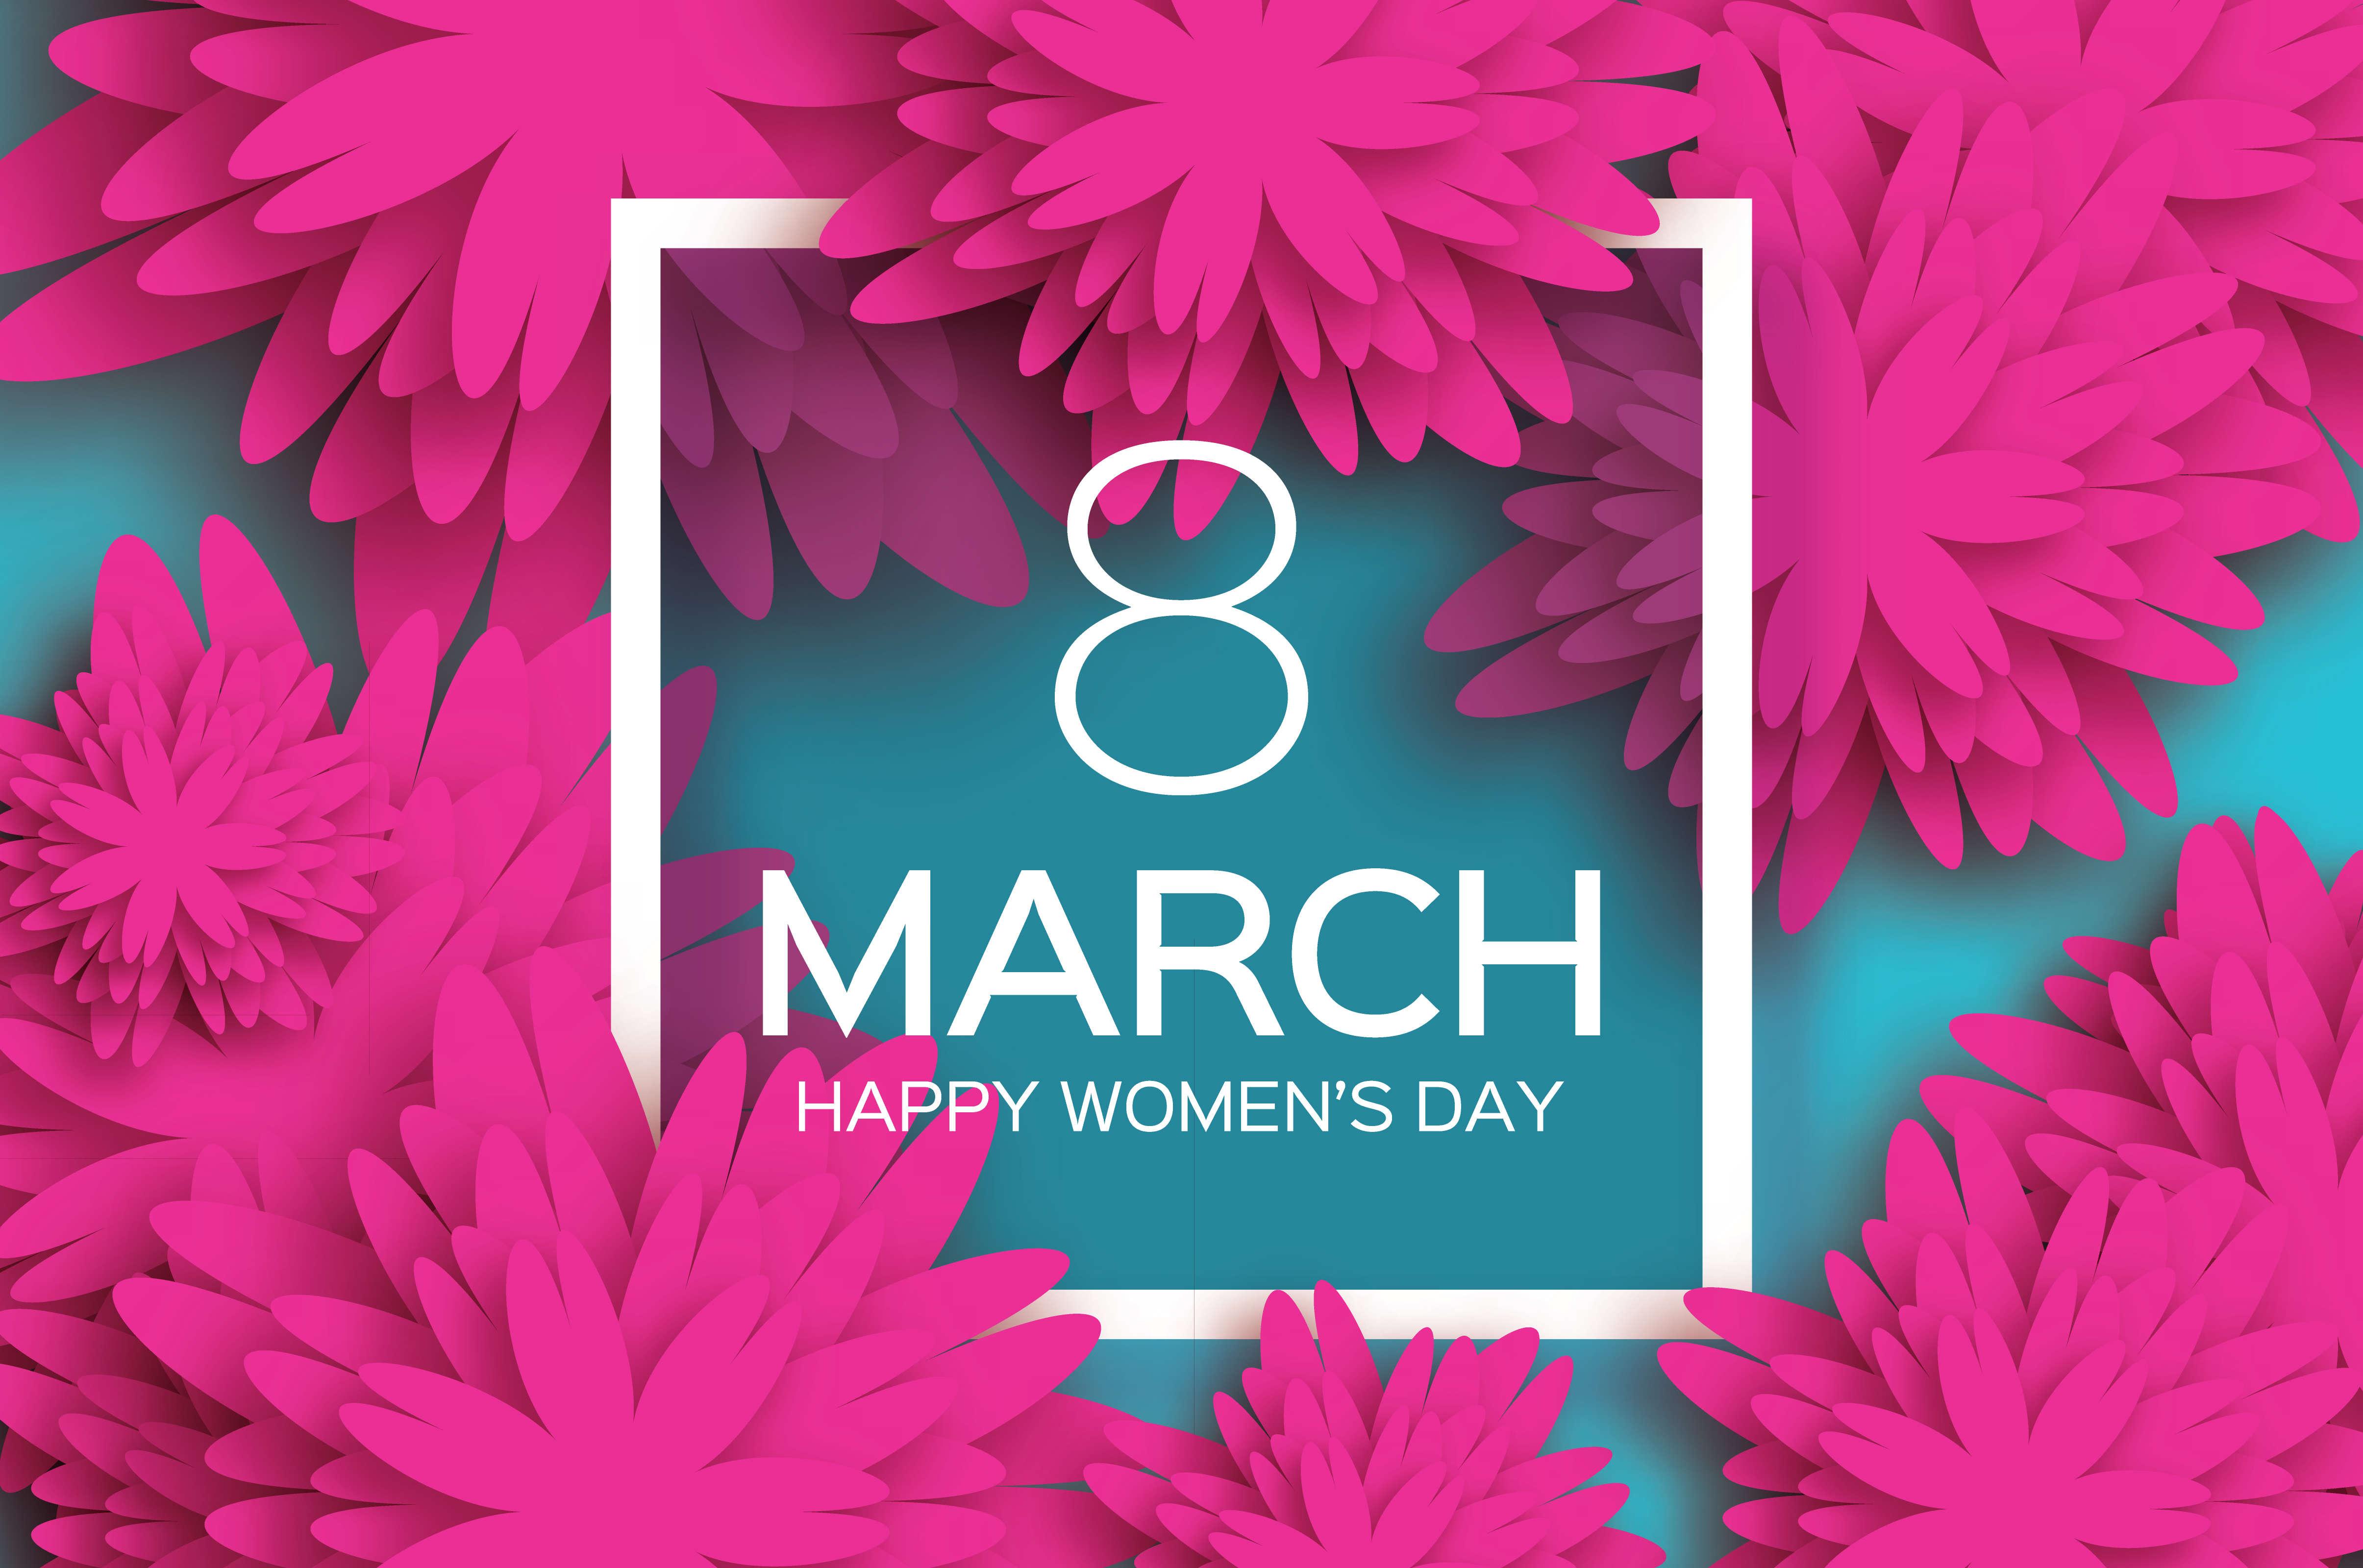 Happy Women's Day 2019: Image, Quotes, Wishes, Messages, Status